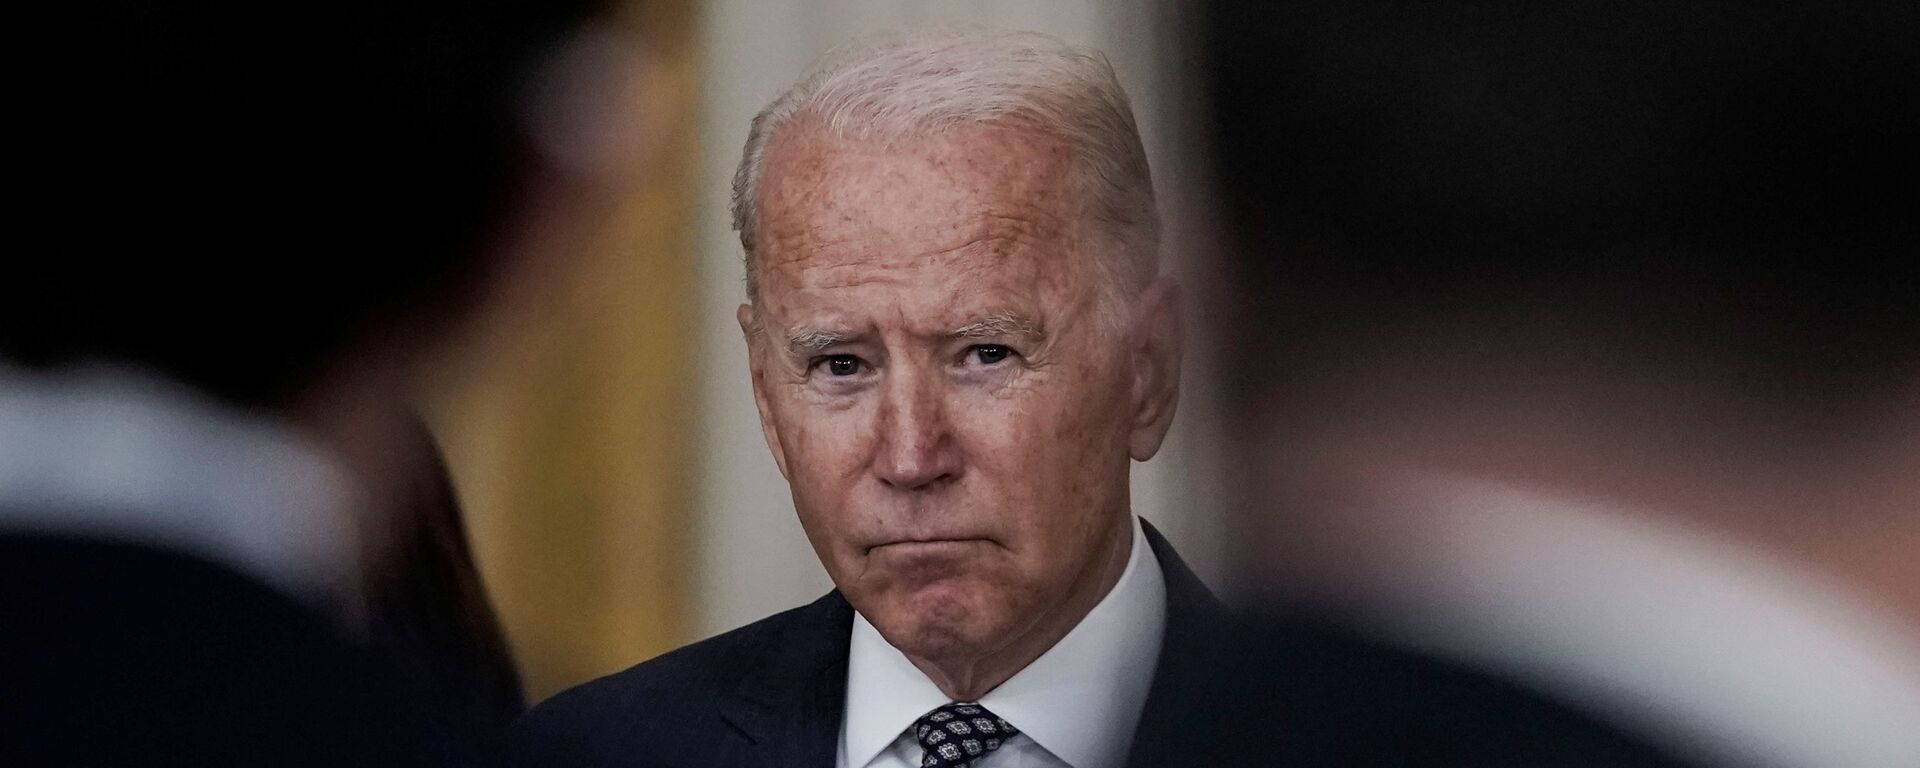 U.S.  President Joe Biden delivers remarks on evacuation efforts and the ongoing situation in Afghanistan during a speech in the East Room at the White House in Washington, U.S., August 20, 2021 - Sputnik International, 1920, 23.10.2021